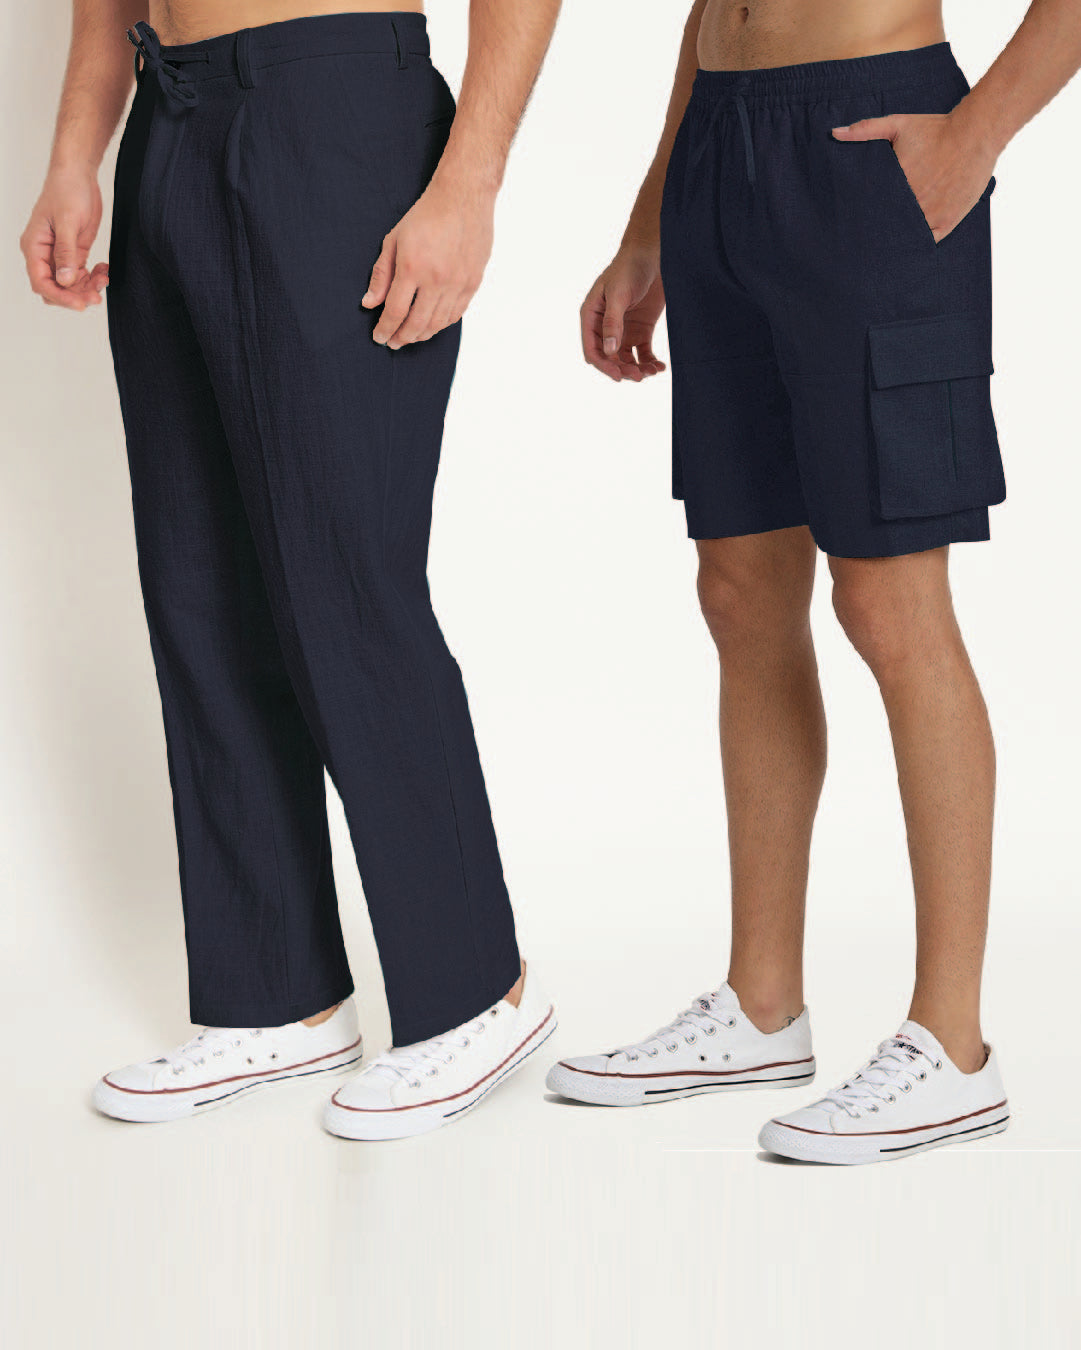 Combo : Causal Ease & Cargo Midnight Blue Men's Pants & Shorts  - Set of 2